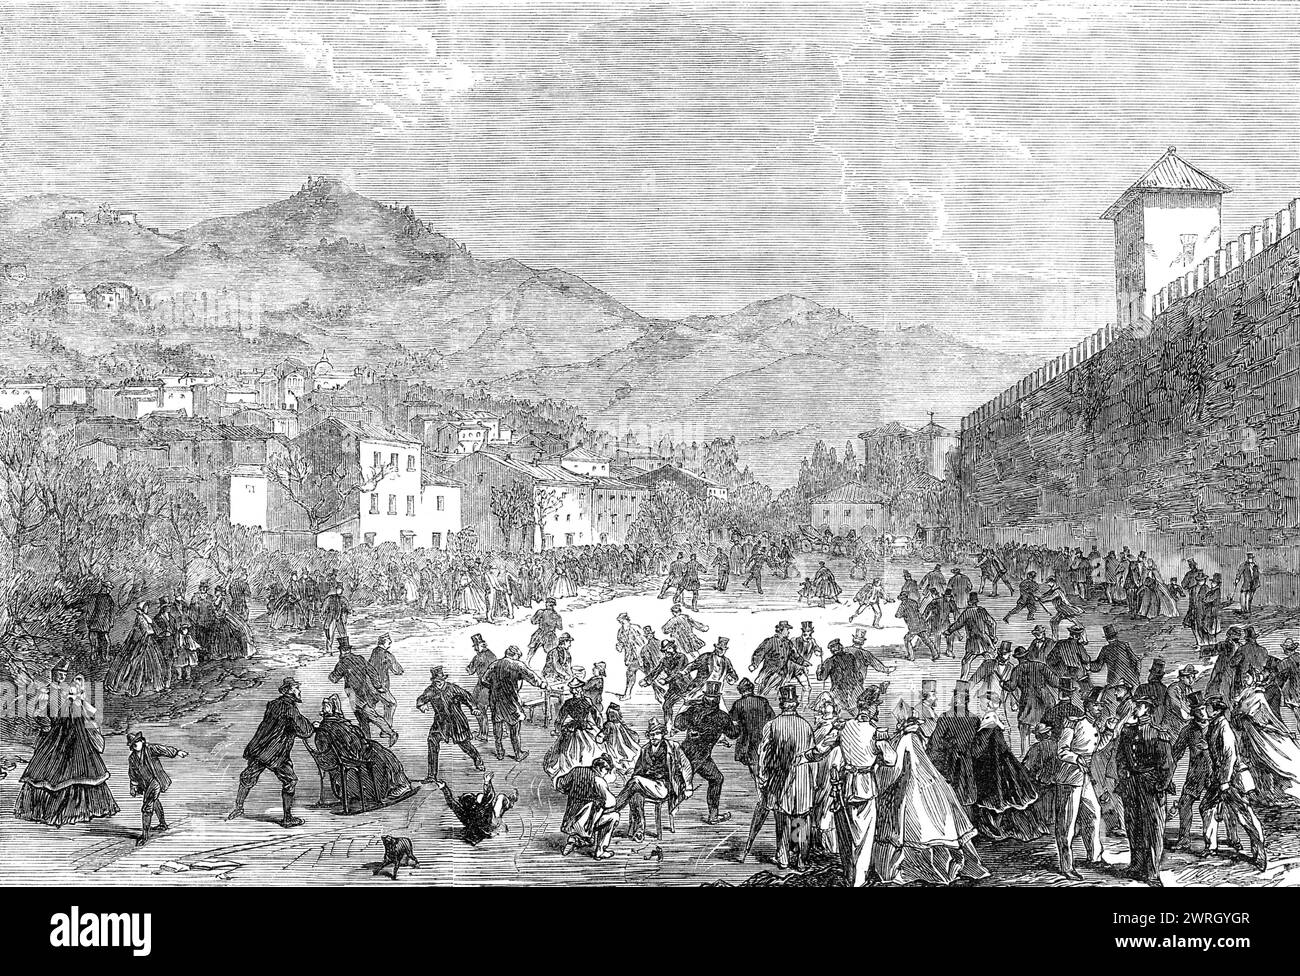 Skating at Florence, 1864. Engraving from a sketch by L. Caldesi. 'In Florence this year our English residents and visitors have been able to enjoy skating with as much zest as has been done on the ornamental waters in our metropolitan parks. From the 5th to the 20th January the thermometer was at 8 deg. (centigrade), and the Arno was almost completely frozen over. Such a cold season has not been known or felt by the Florentines for ten years; and it has been still more trying on account of a sharp easterly wind blowing for many days. As the Engraving shows, the place where the skating went on Stock Photo